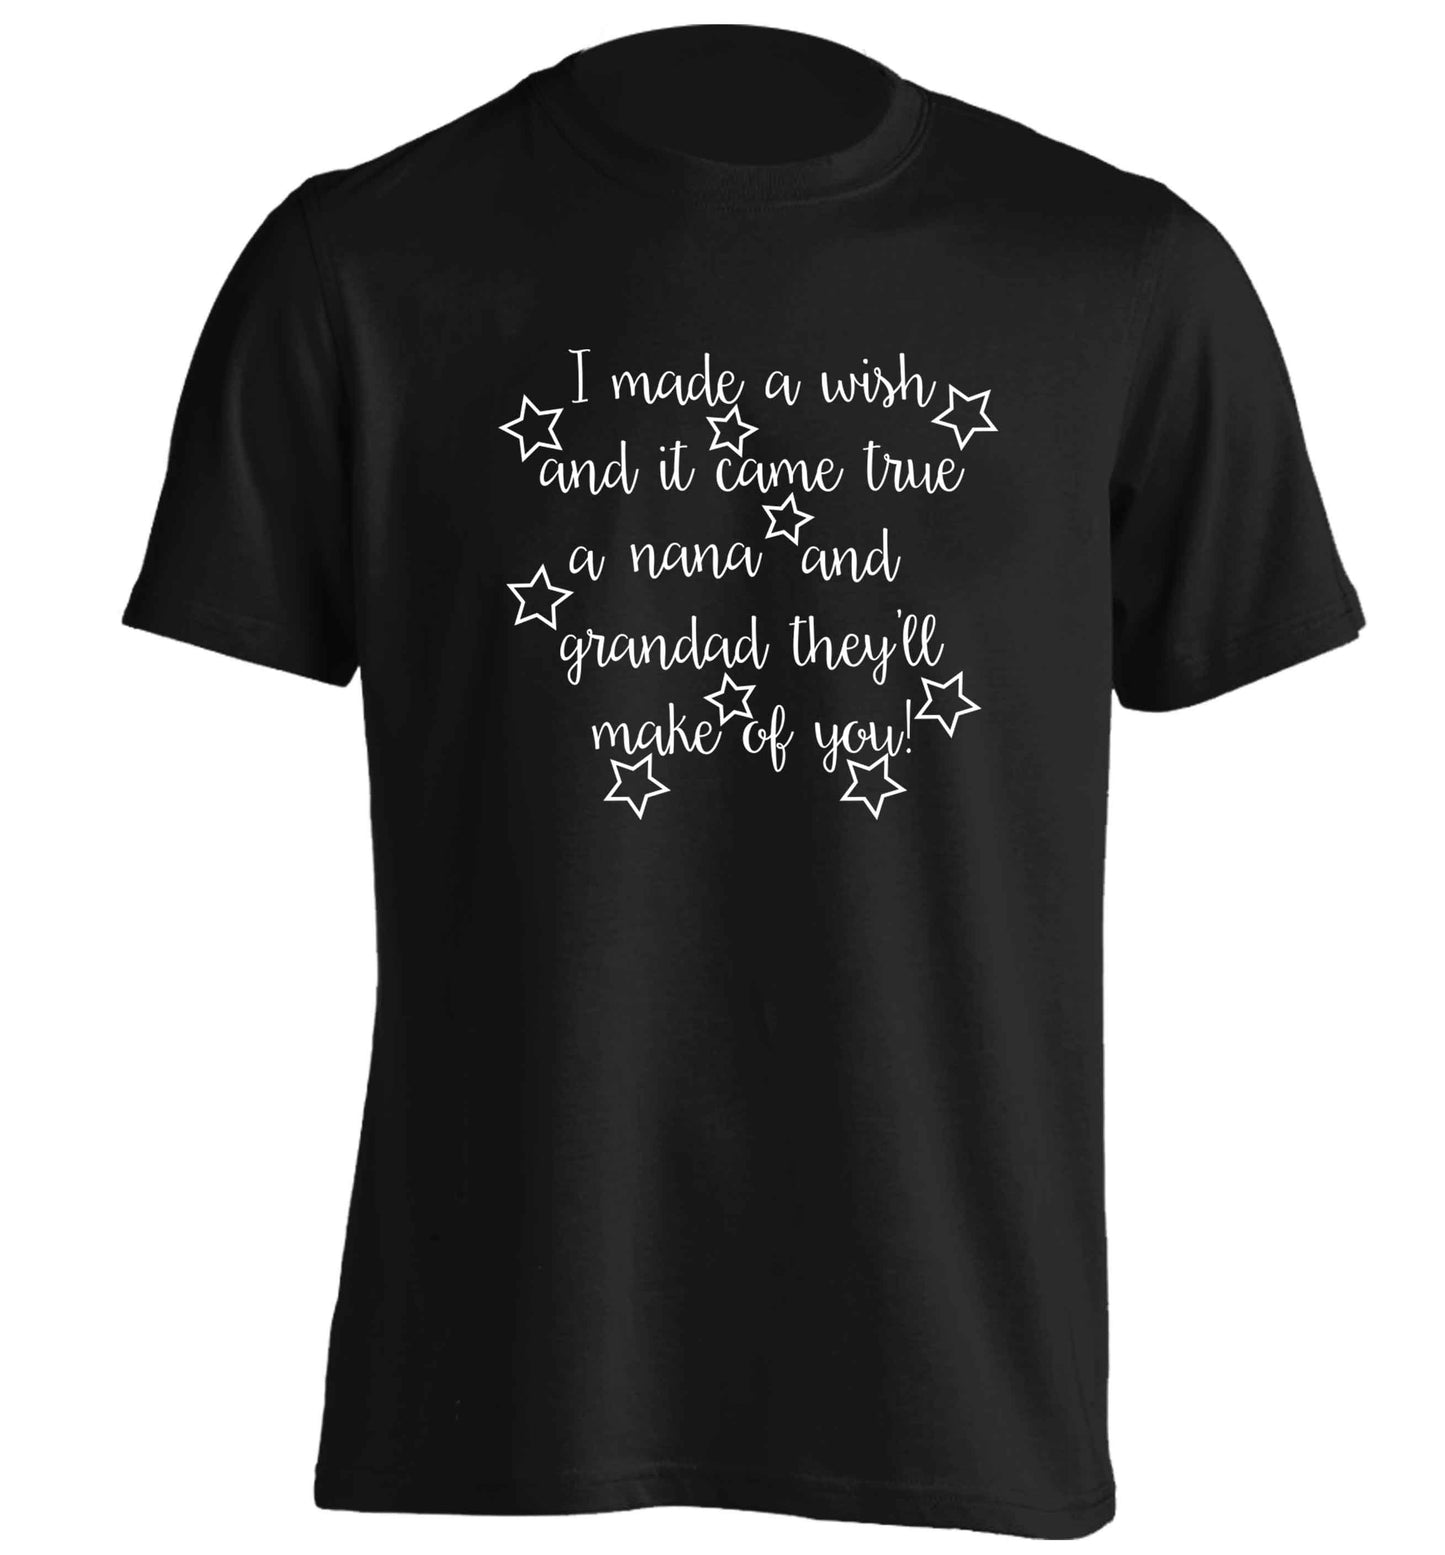 I made a wish and it came true a nana and grandad they'll make of you! adults unisex black Tshirt 2XL